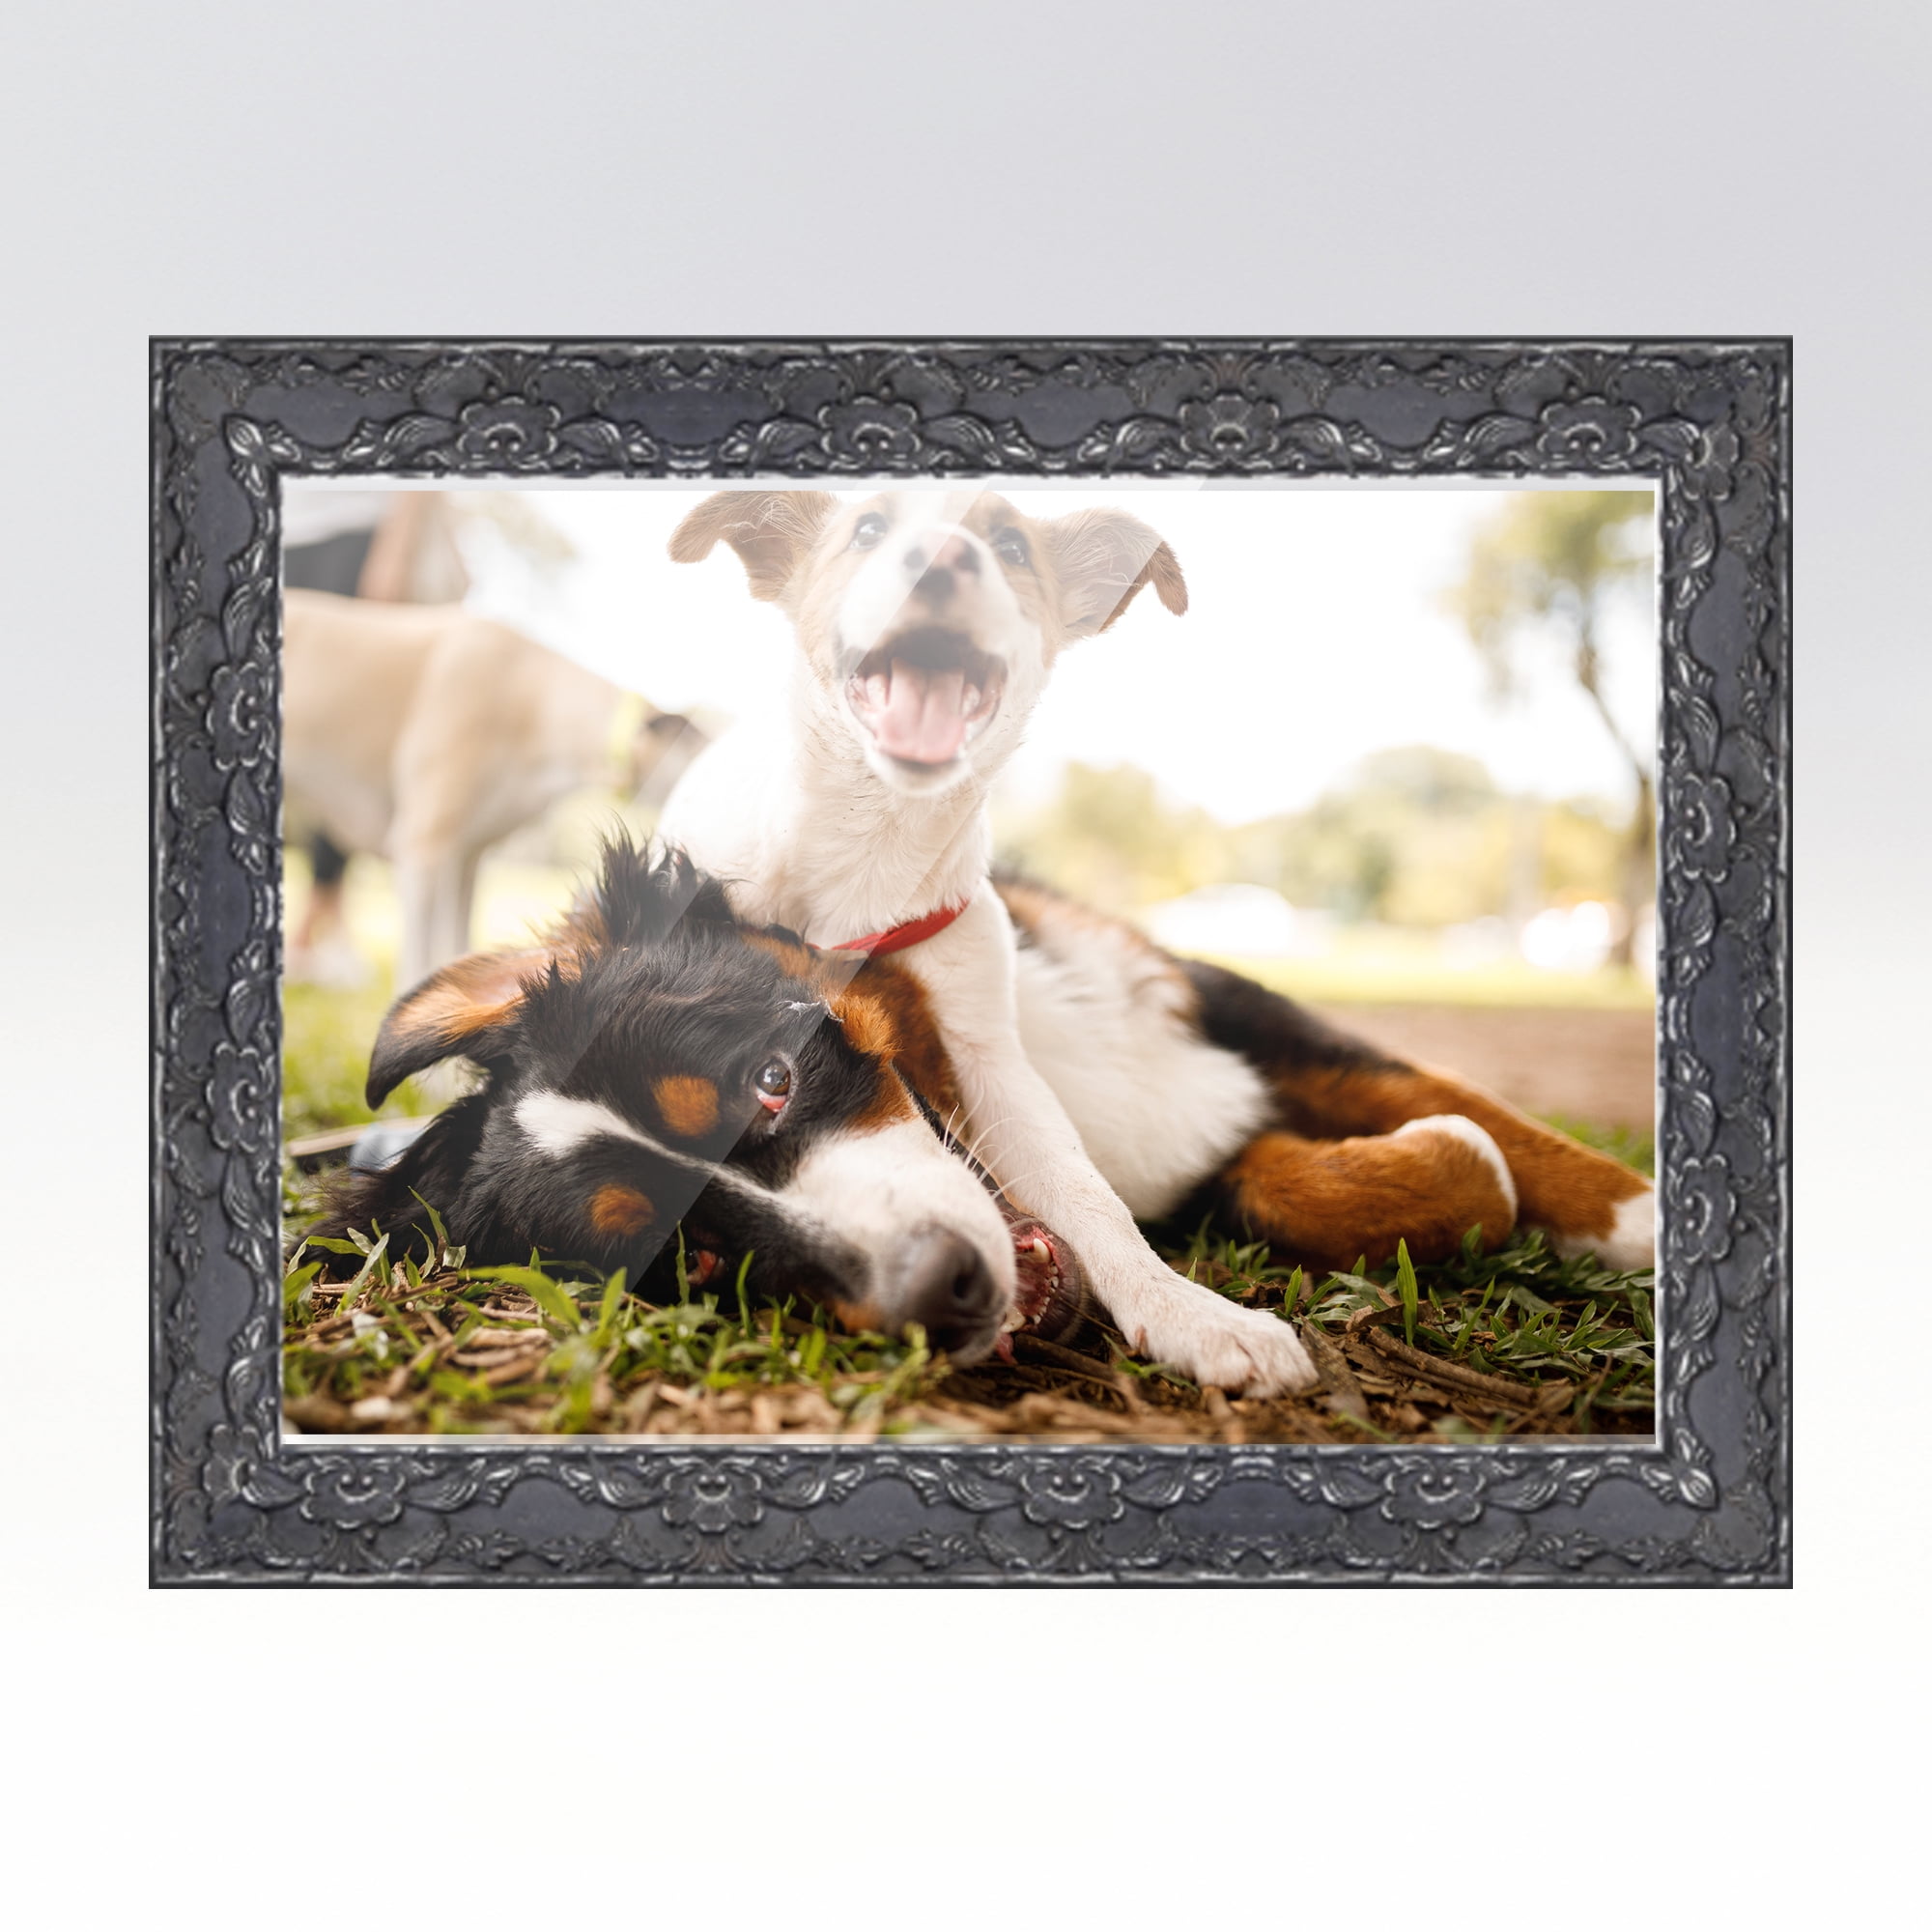 8x6 Gold Frame 8x6 Photo Frame Gold 8 X 6 Inch Gold Picture Frame